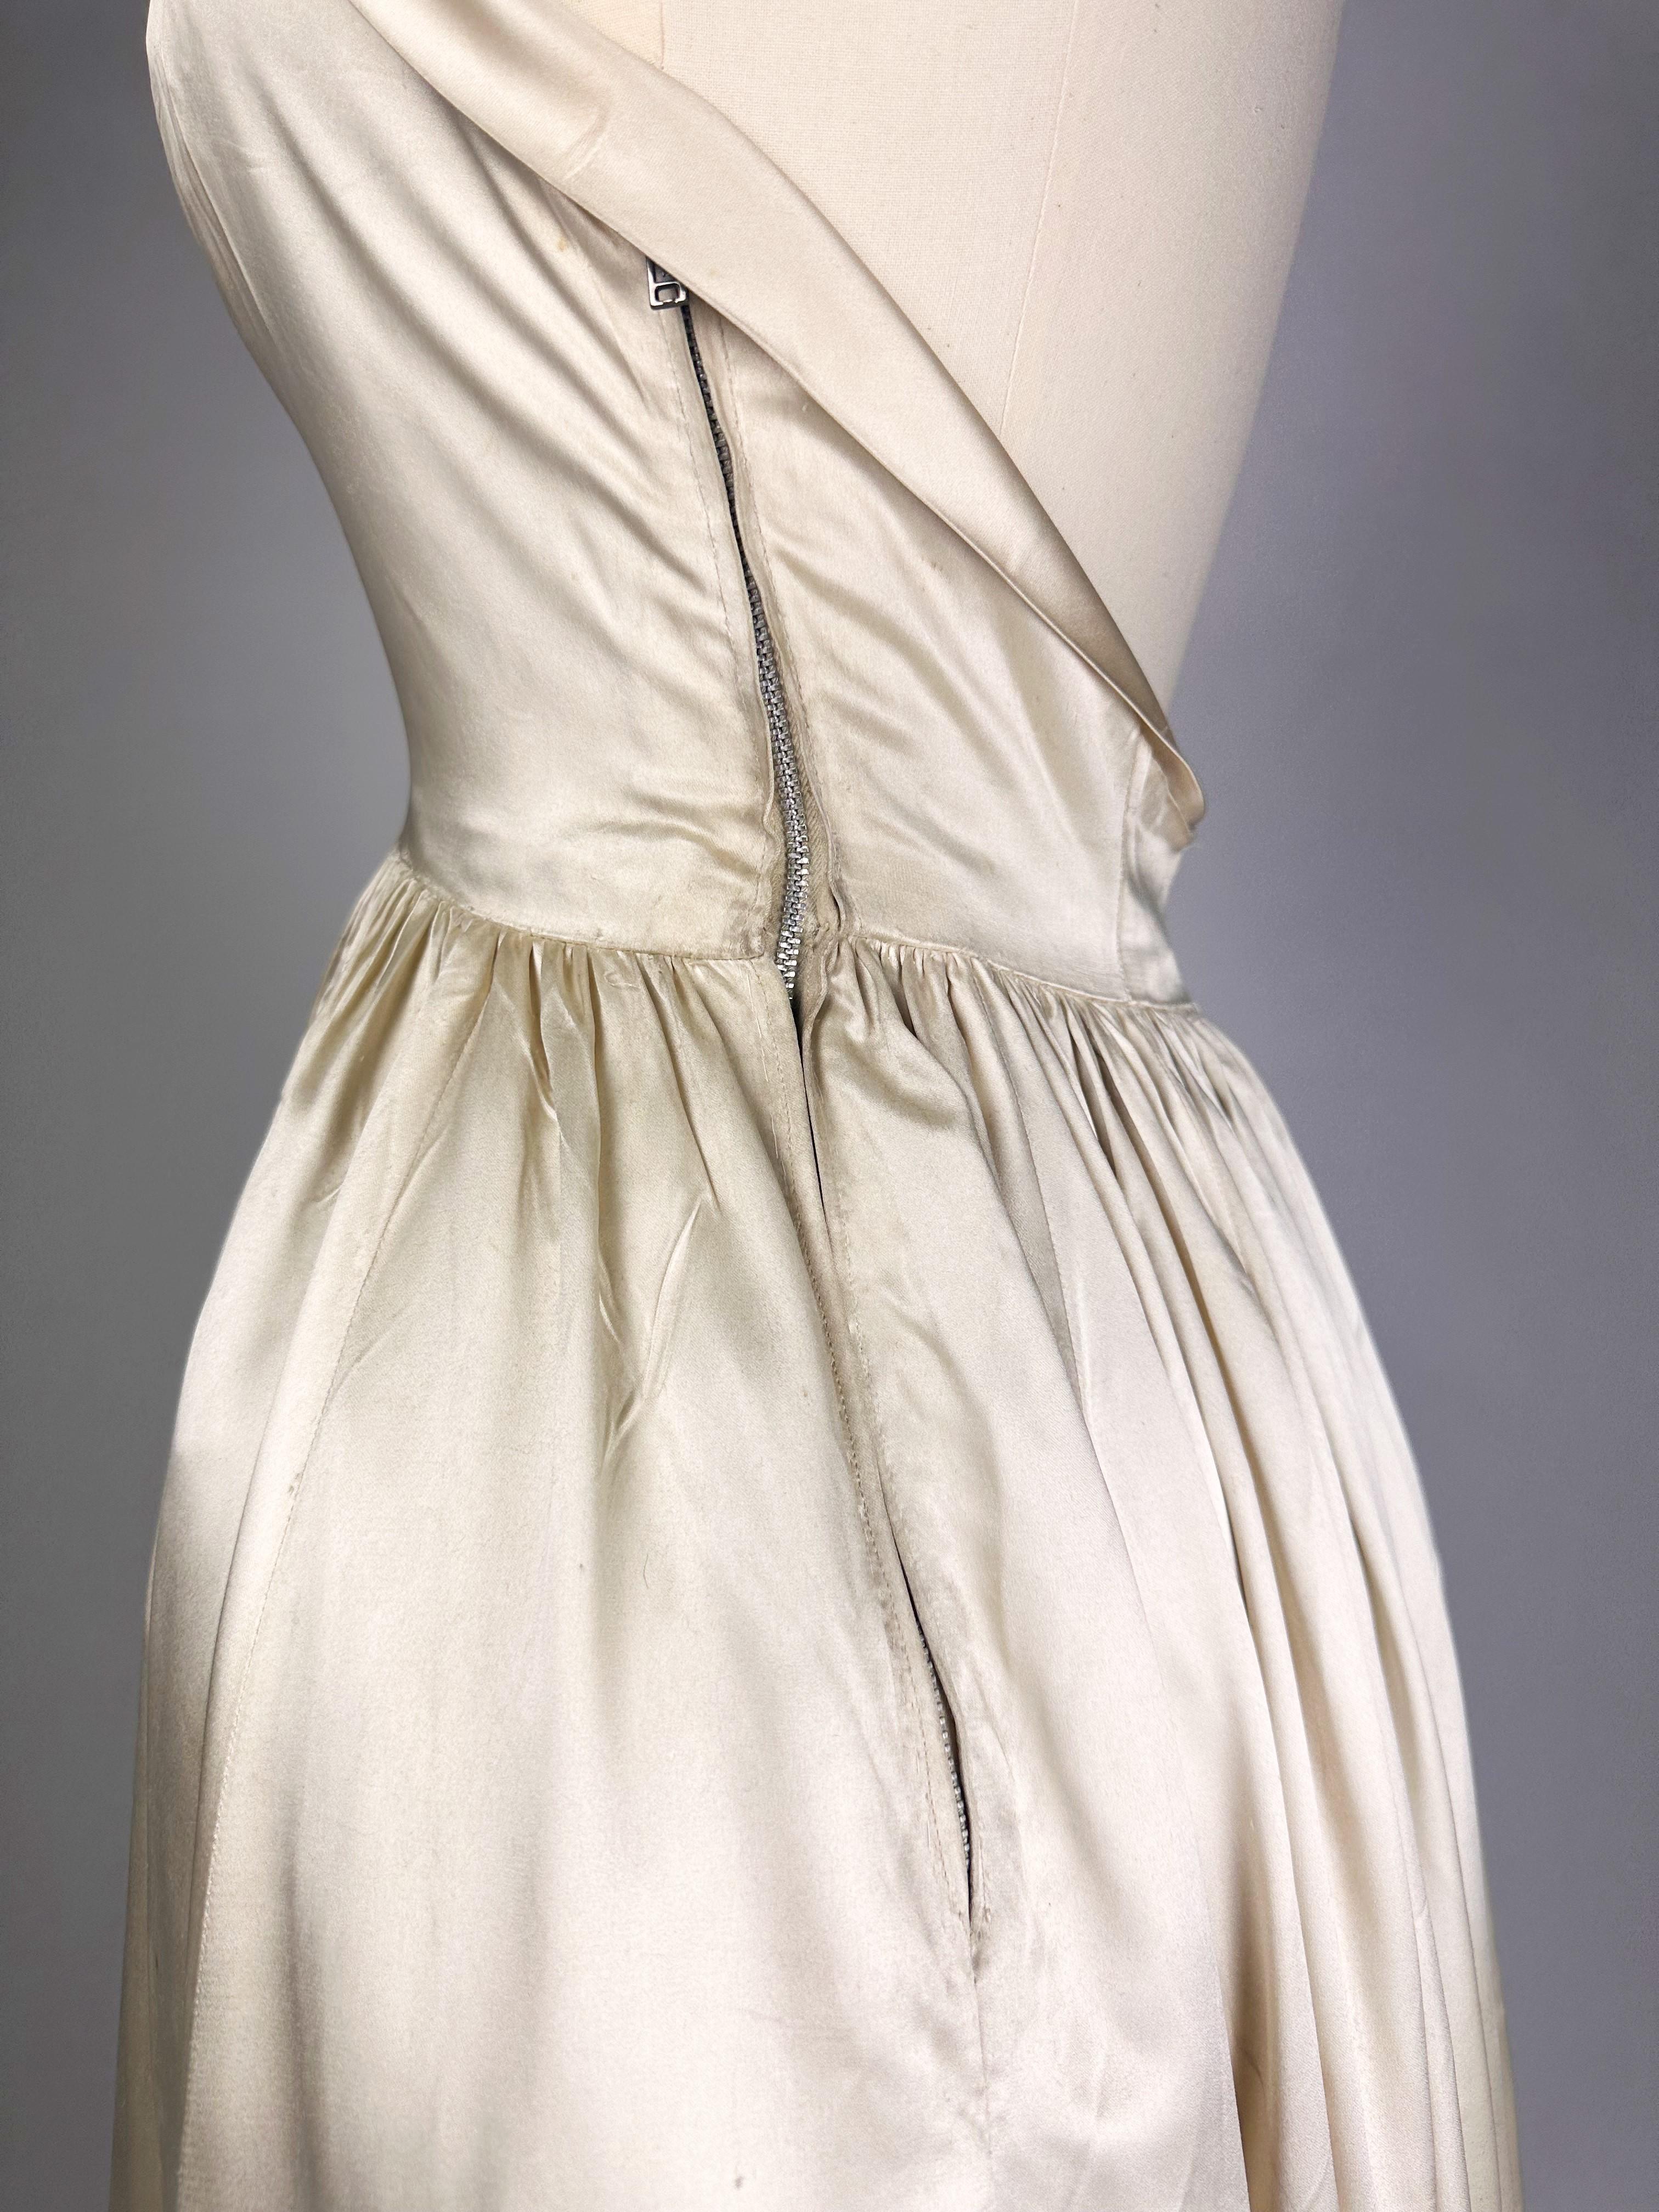 Women's Evening dress by Lucien Lelong Couture in embroidered champagne satin Circa 1942